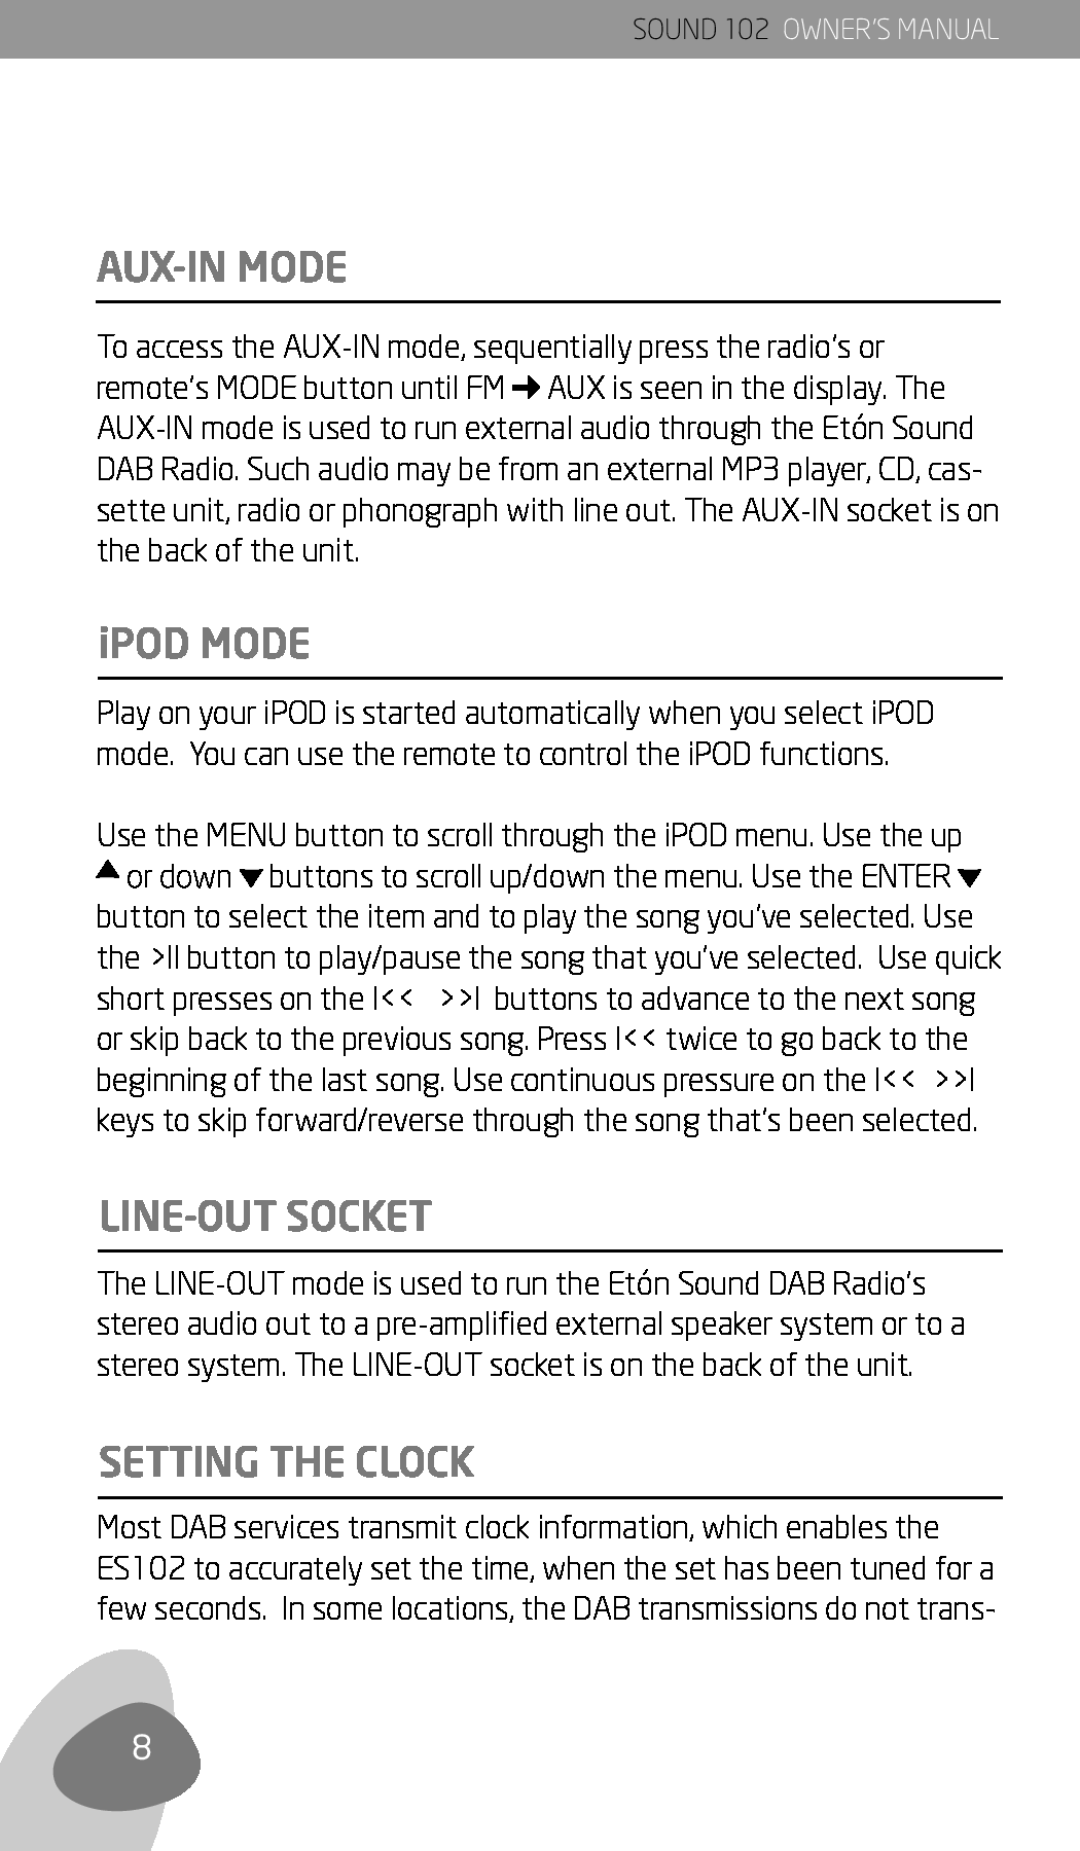 Eton 102 owner manual Aux-Inmode, iPOD MODE, Line-Outsocket, Setting The Clock 